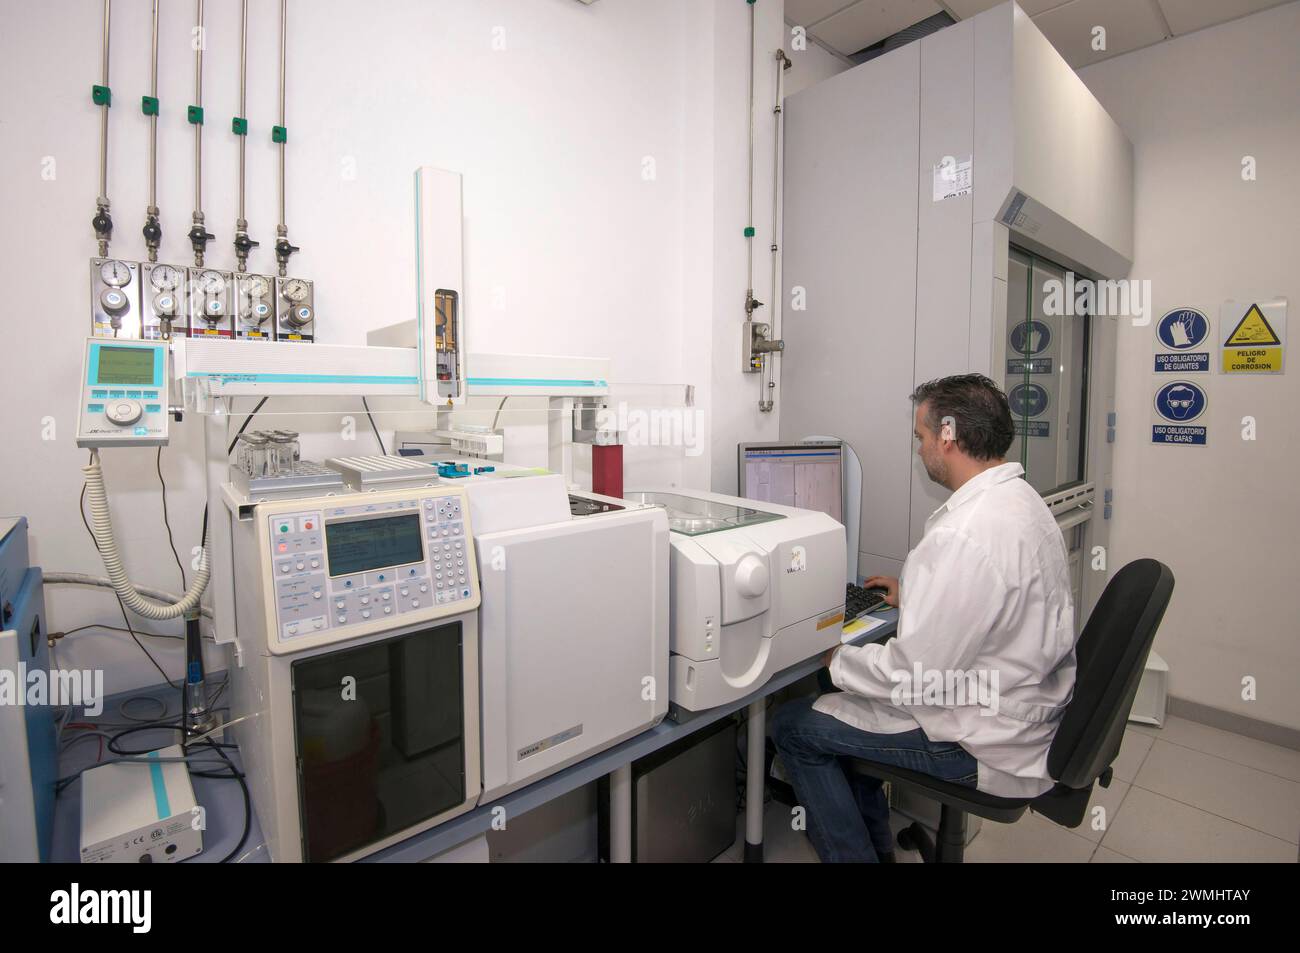 Technician in the quality control room of a water distribution company Stock Photo